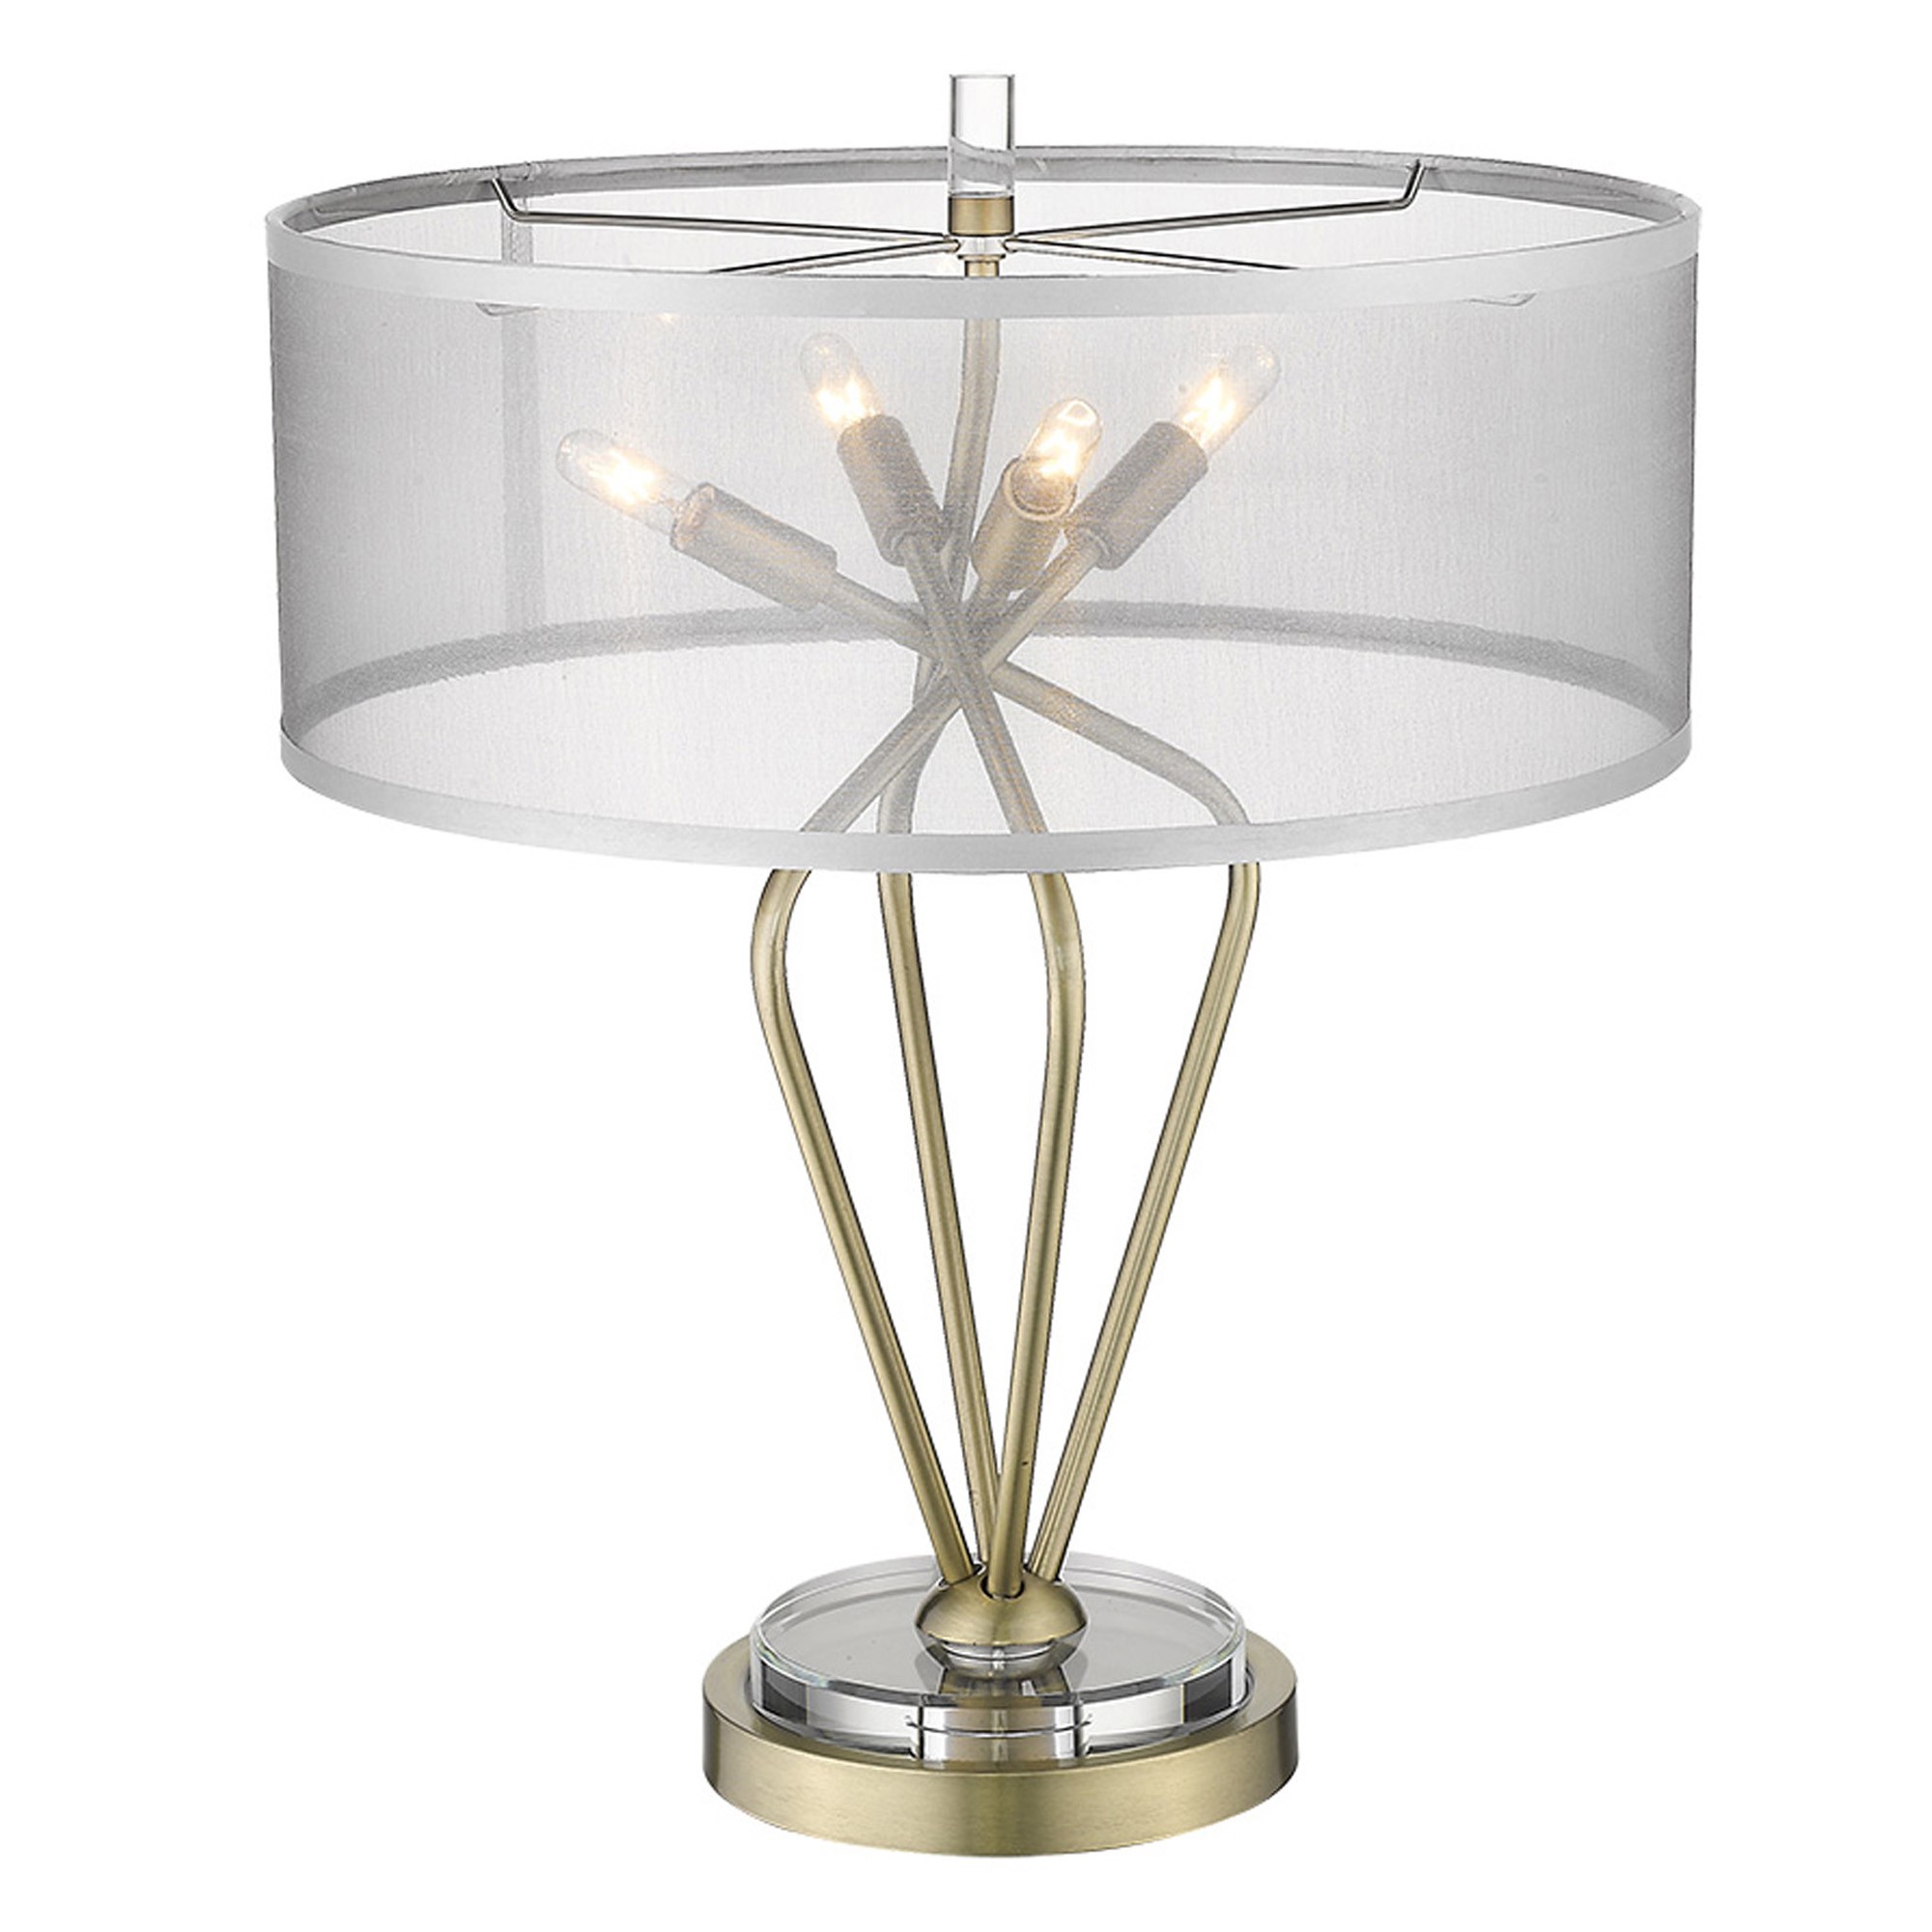 Perret 4-Light Aged Brass Table Lamp